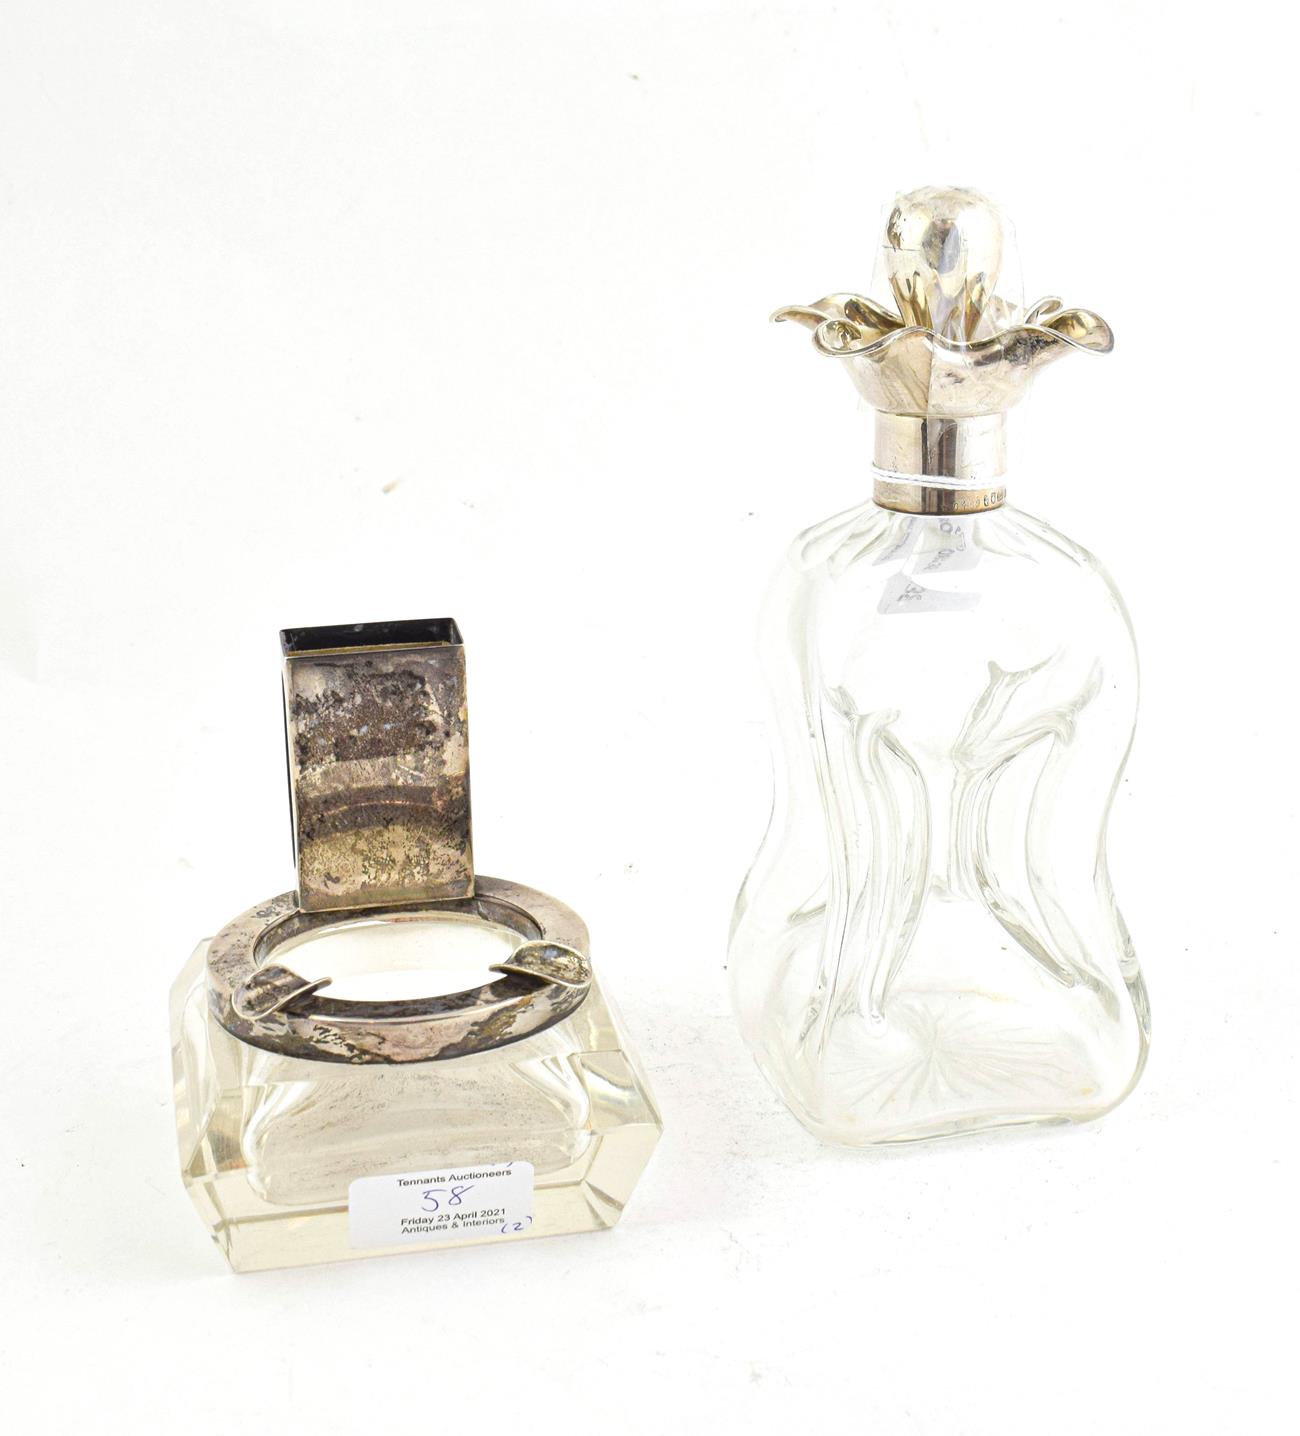 Lot 58 - A German Silver-Mounted Glass Decanter, by Wilhelm Binder, Circa 1900, the glass body...